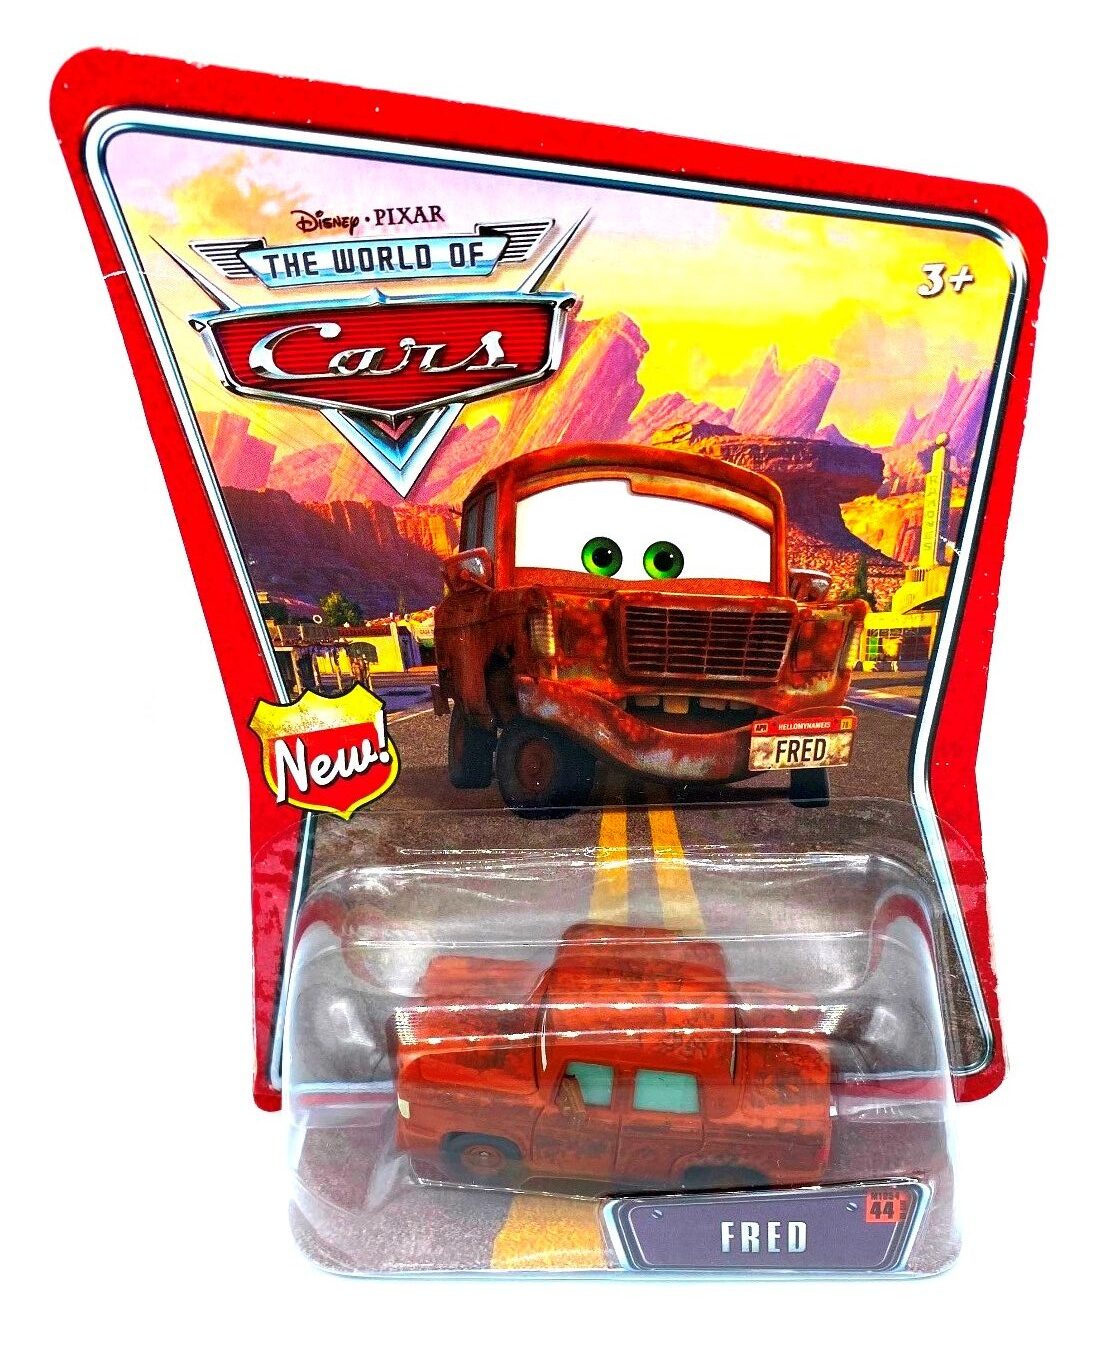 Fred The World Of Cars New Pixar Movie Cars Series 3 Disney Pixar Cars Feature Film Animated Movie Collectible Series Rare Vintage 08 Now And Then Collectibles